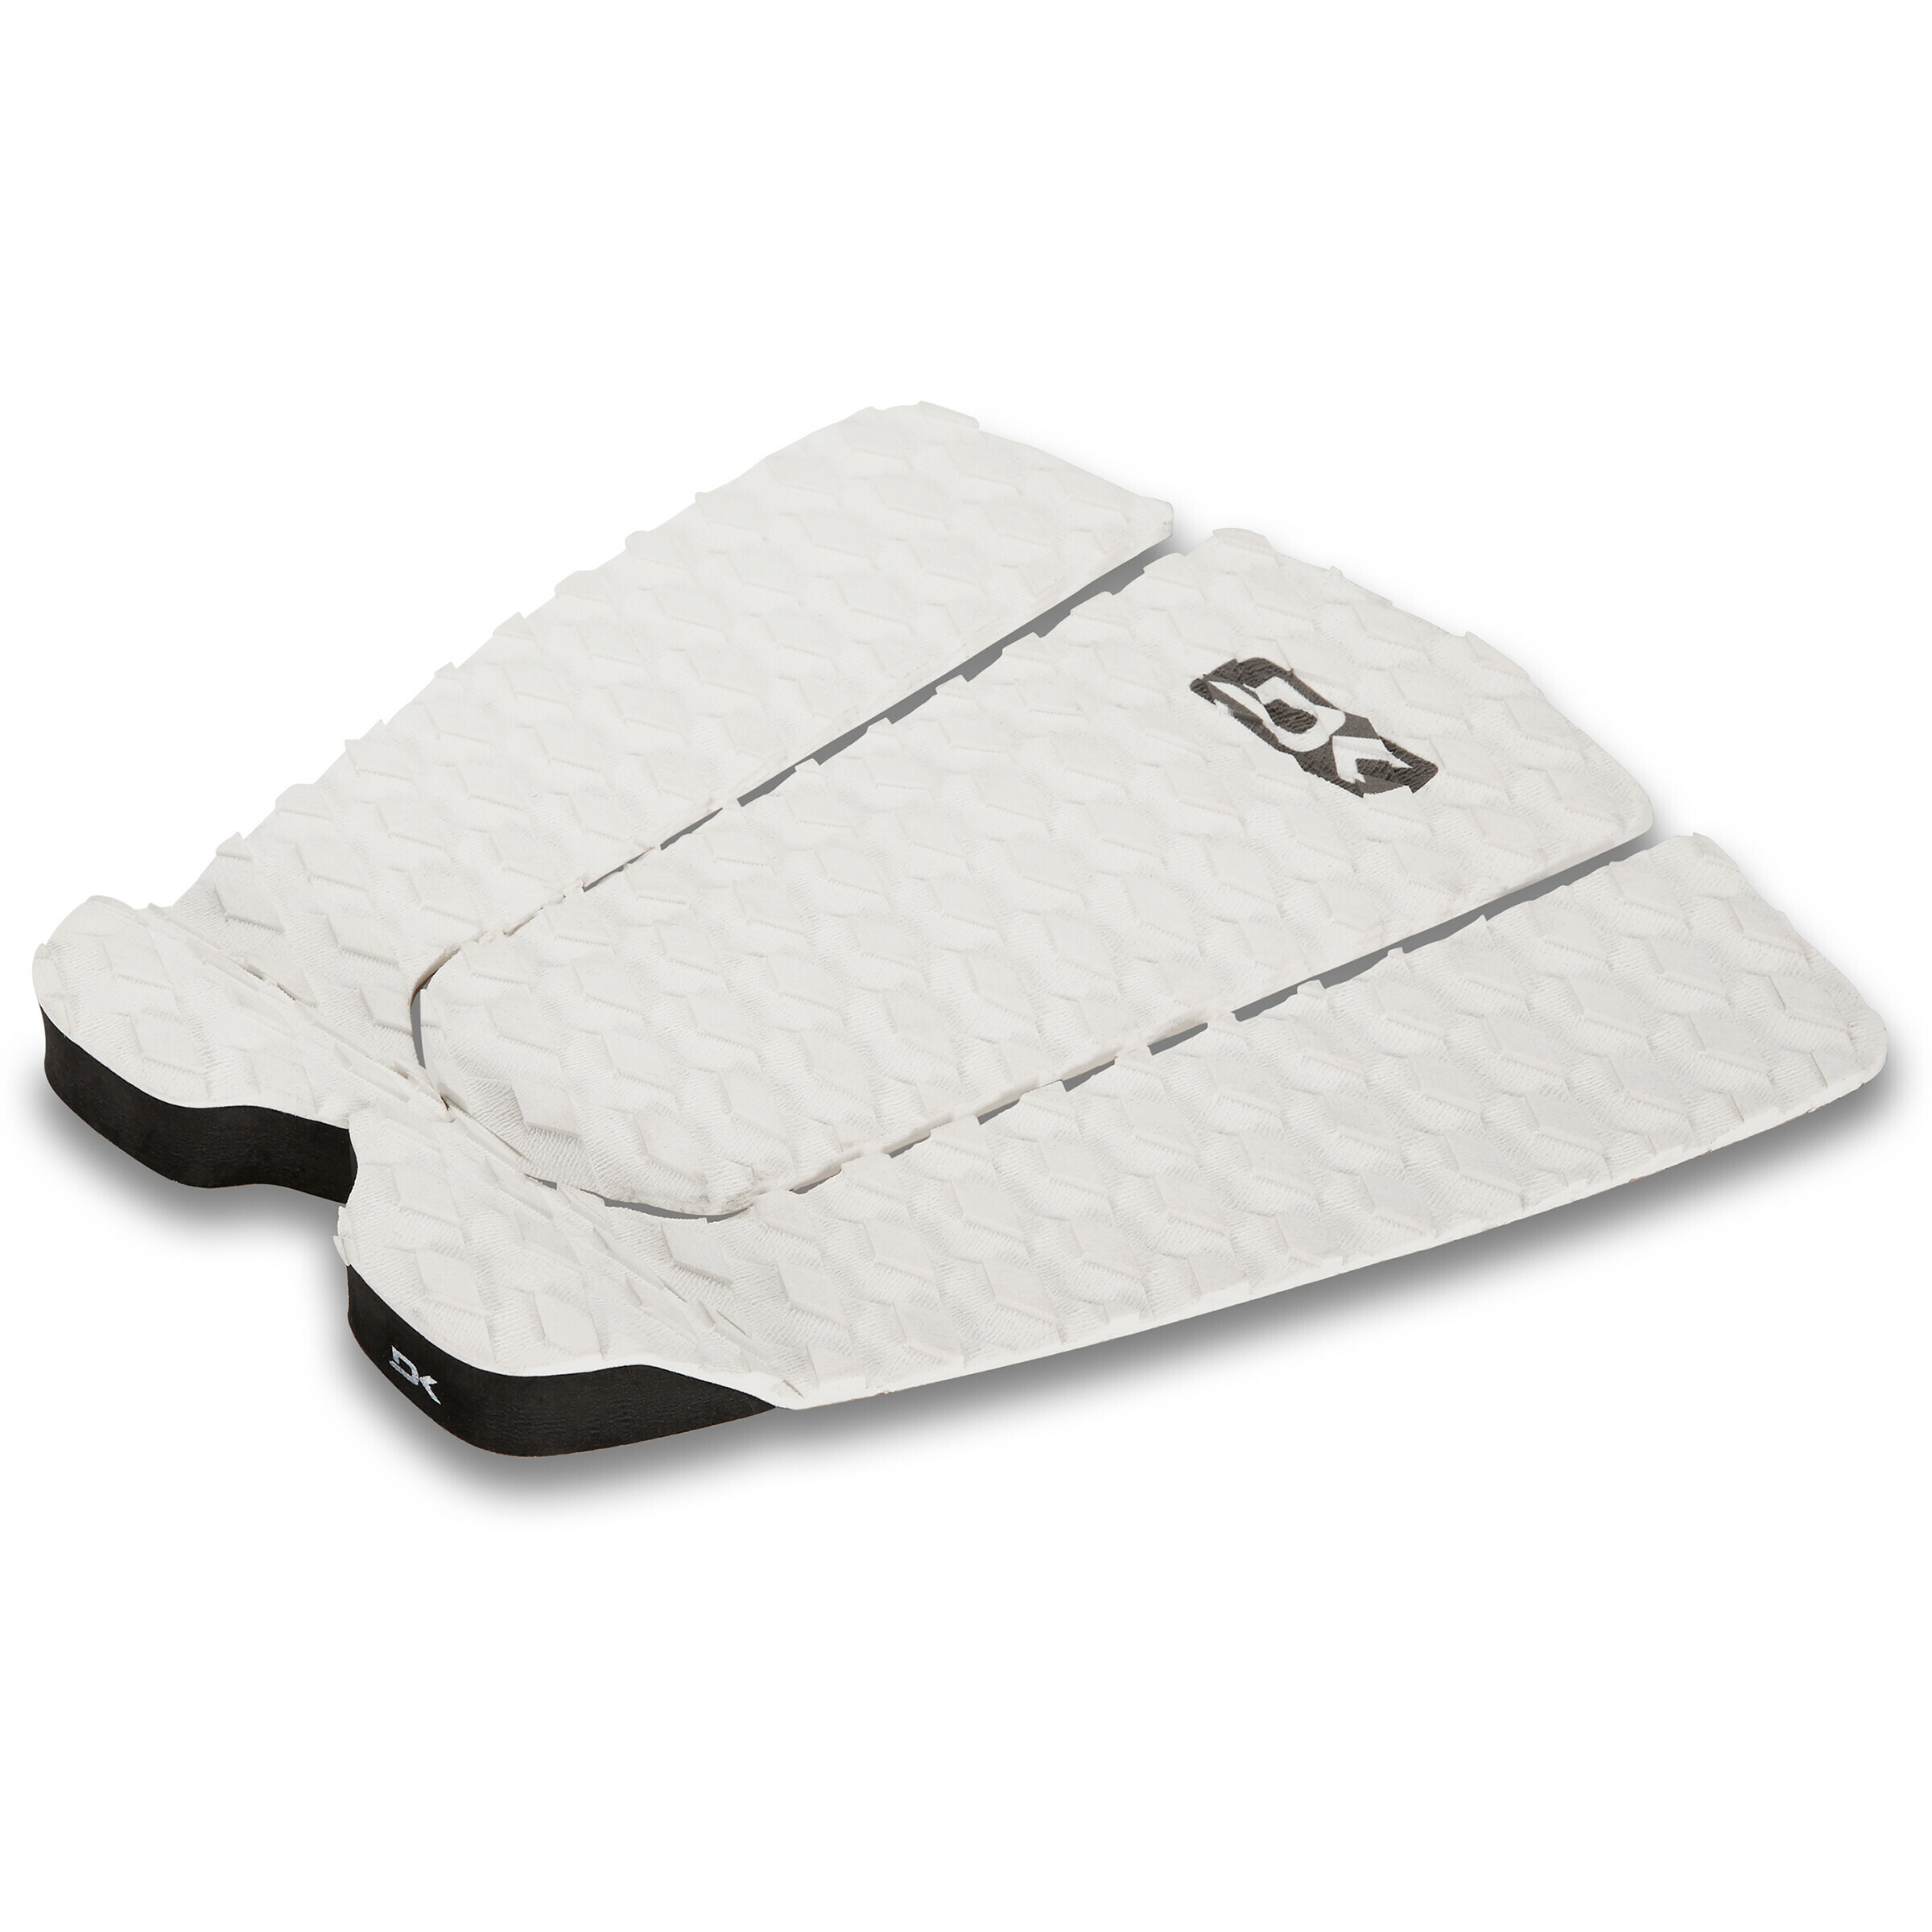 ANDY IRONS PRO SURF TRACTION PAD